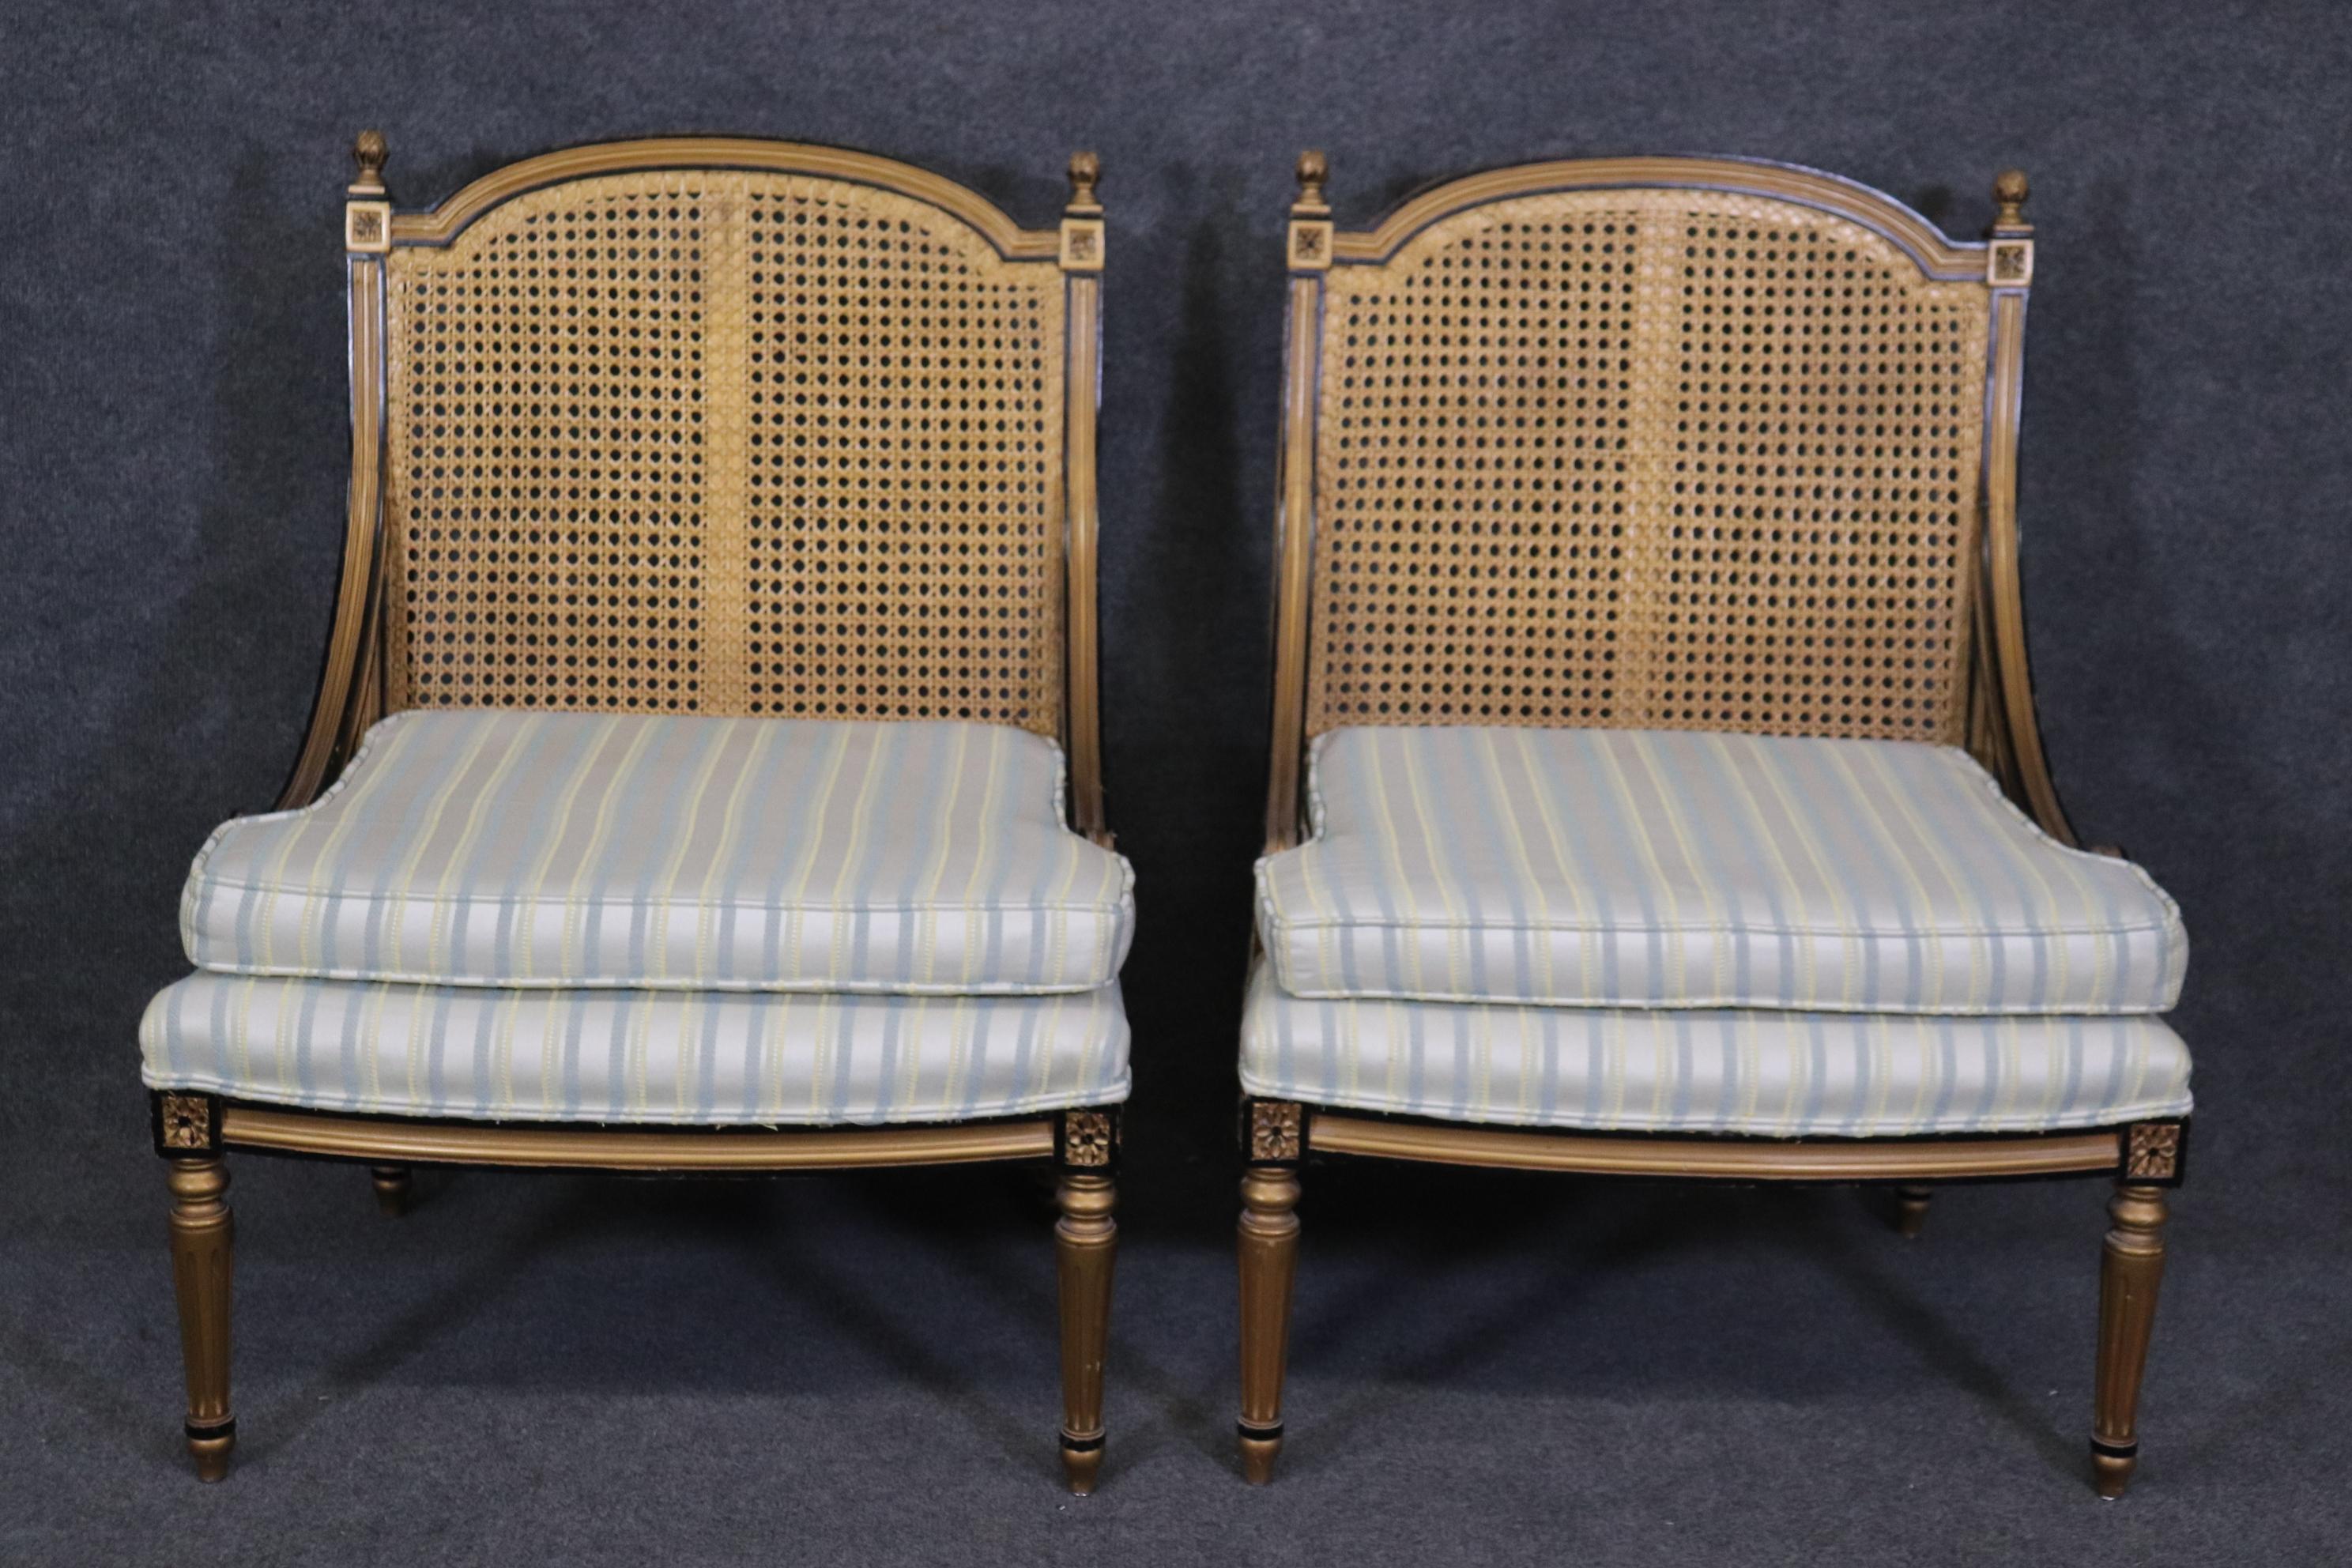 Dimensions- H: 34 1/4in W: 25 3/4in D: 24in SH: 17 1/4in 
This Pair of French Louis XVI Style Cane Back Bergeres, Lounge Chairs are perfect for you and your home and are a lovely example of high quality furniture from the late 20th century! If you